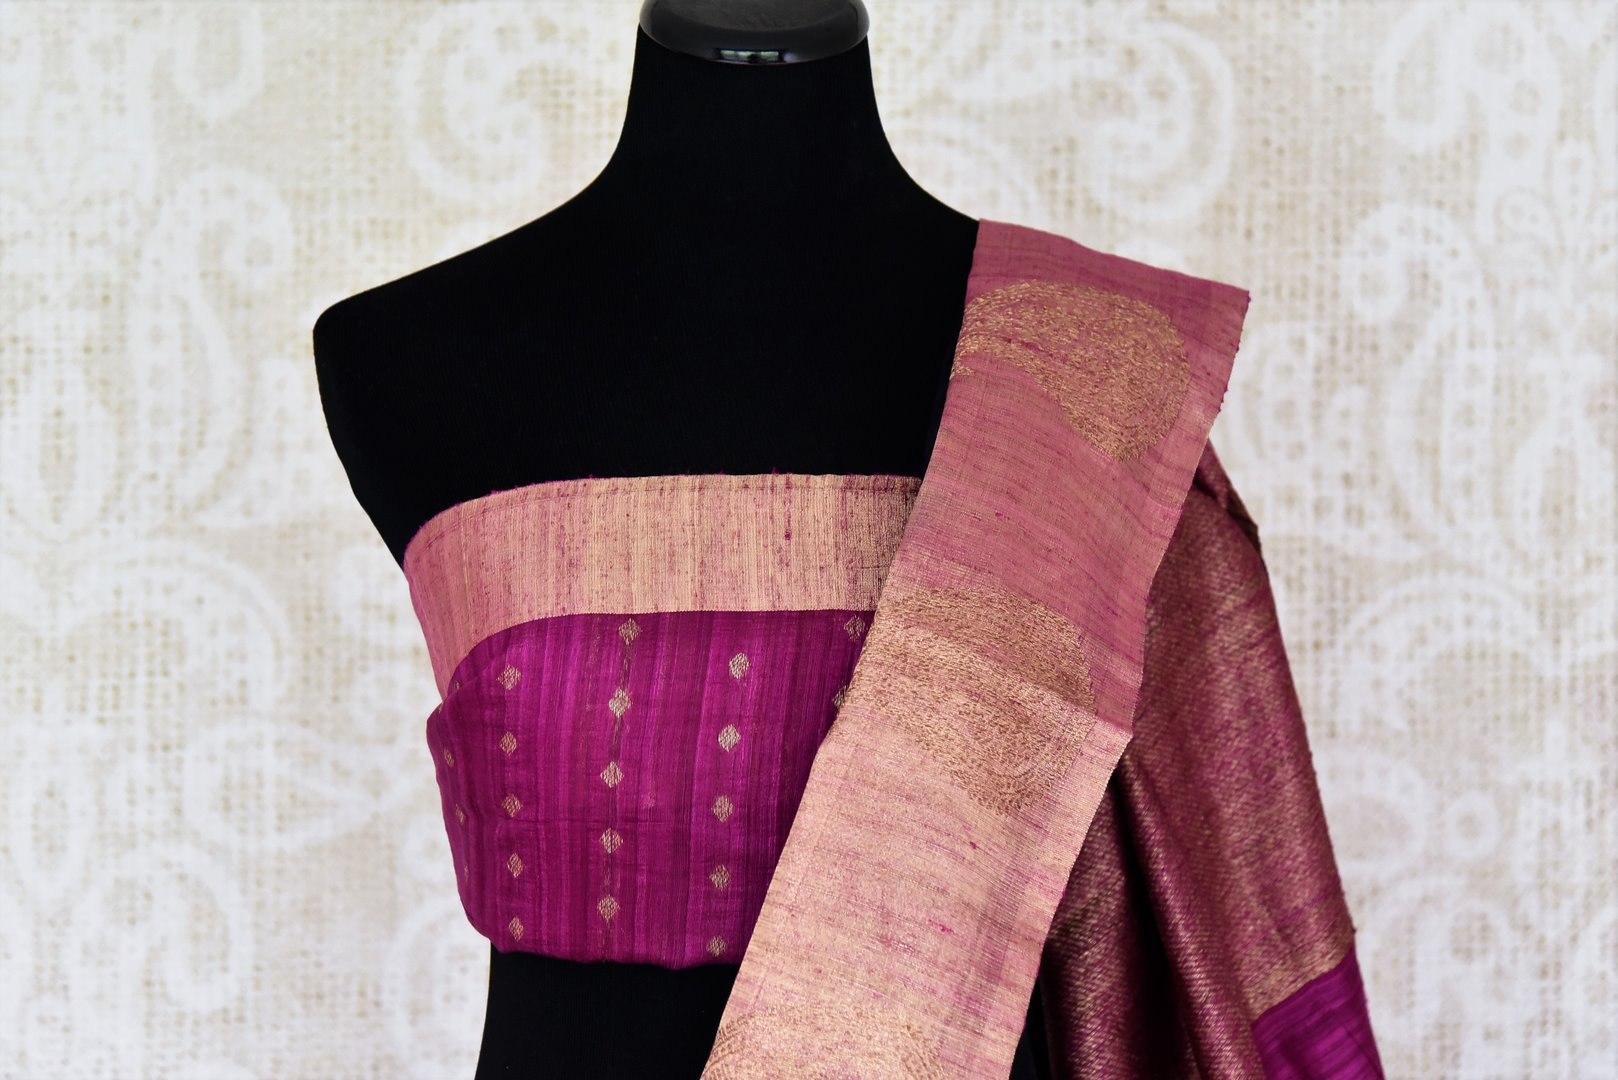 Buy classic black tussar Banarasi saree online in USA with pink zari border and buta. Make an elegant ethnic fashion statement at parties, weddings and special occasions with a splendid collection of Indian designer silk sarees, Banarasi sarees, handwoven sarees from Pure Elegance Indian clothing store in USA or shop online.-blouse pallu